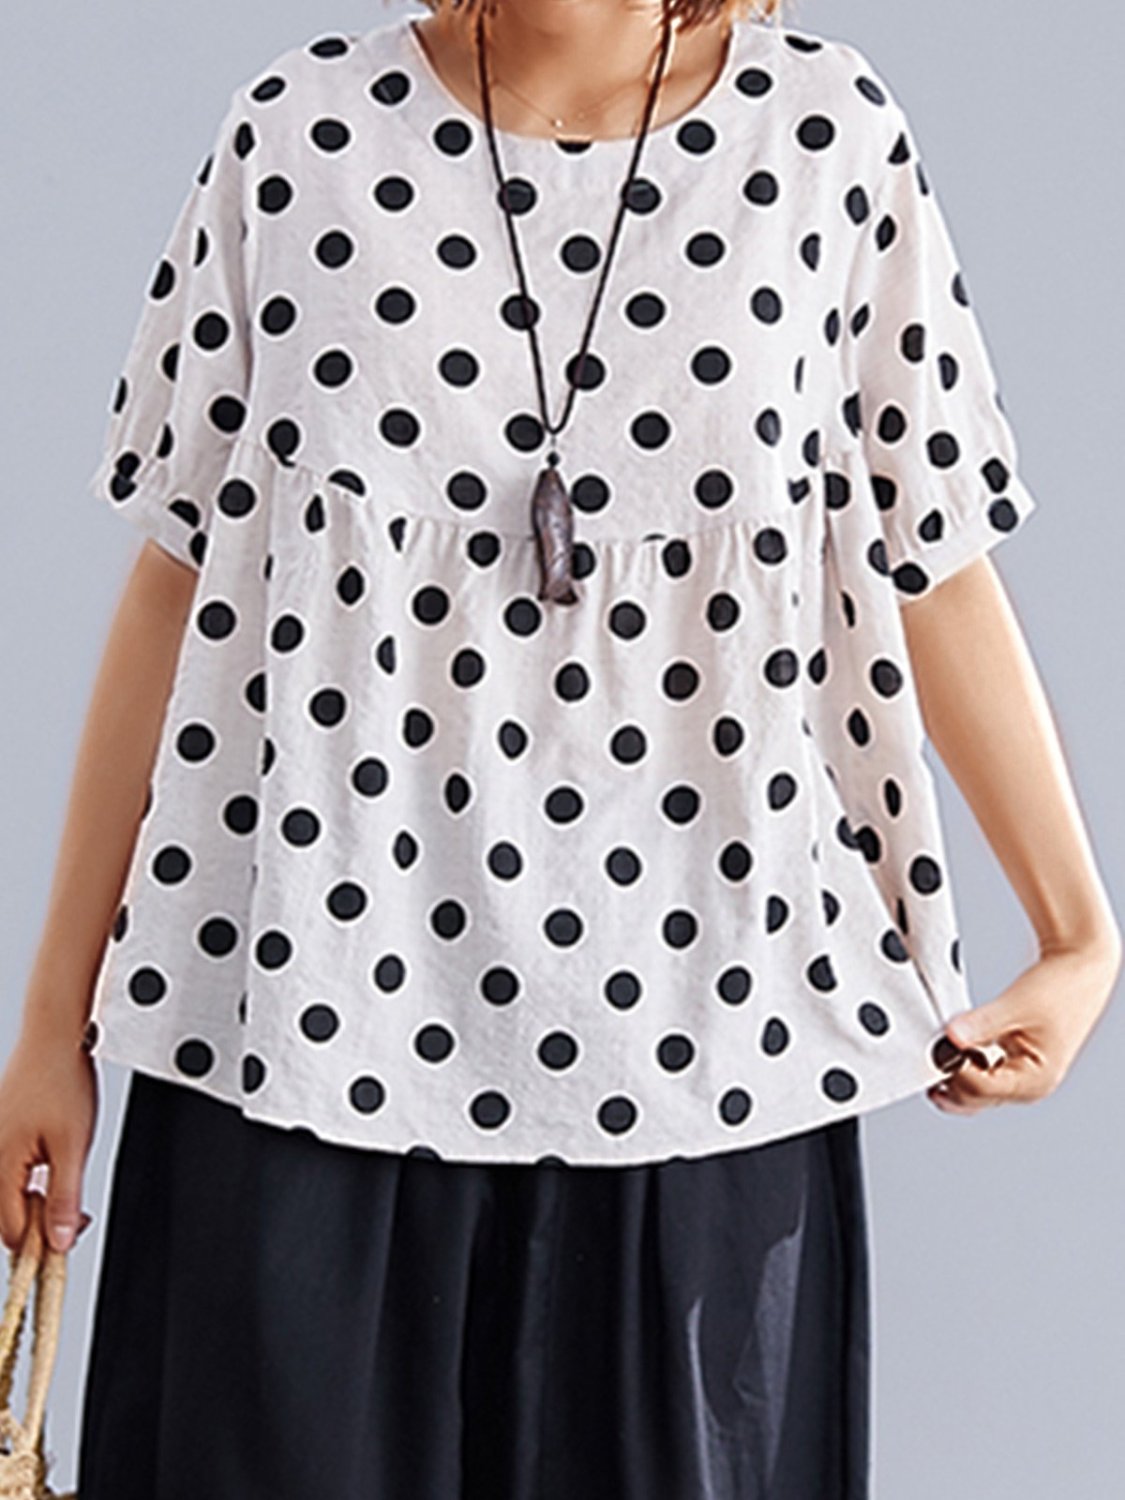 US$ 32.14 - Plus Size Women Short Sleeve Round Neck Polka Dots Casual ...